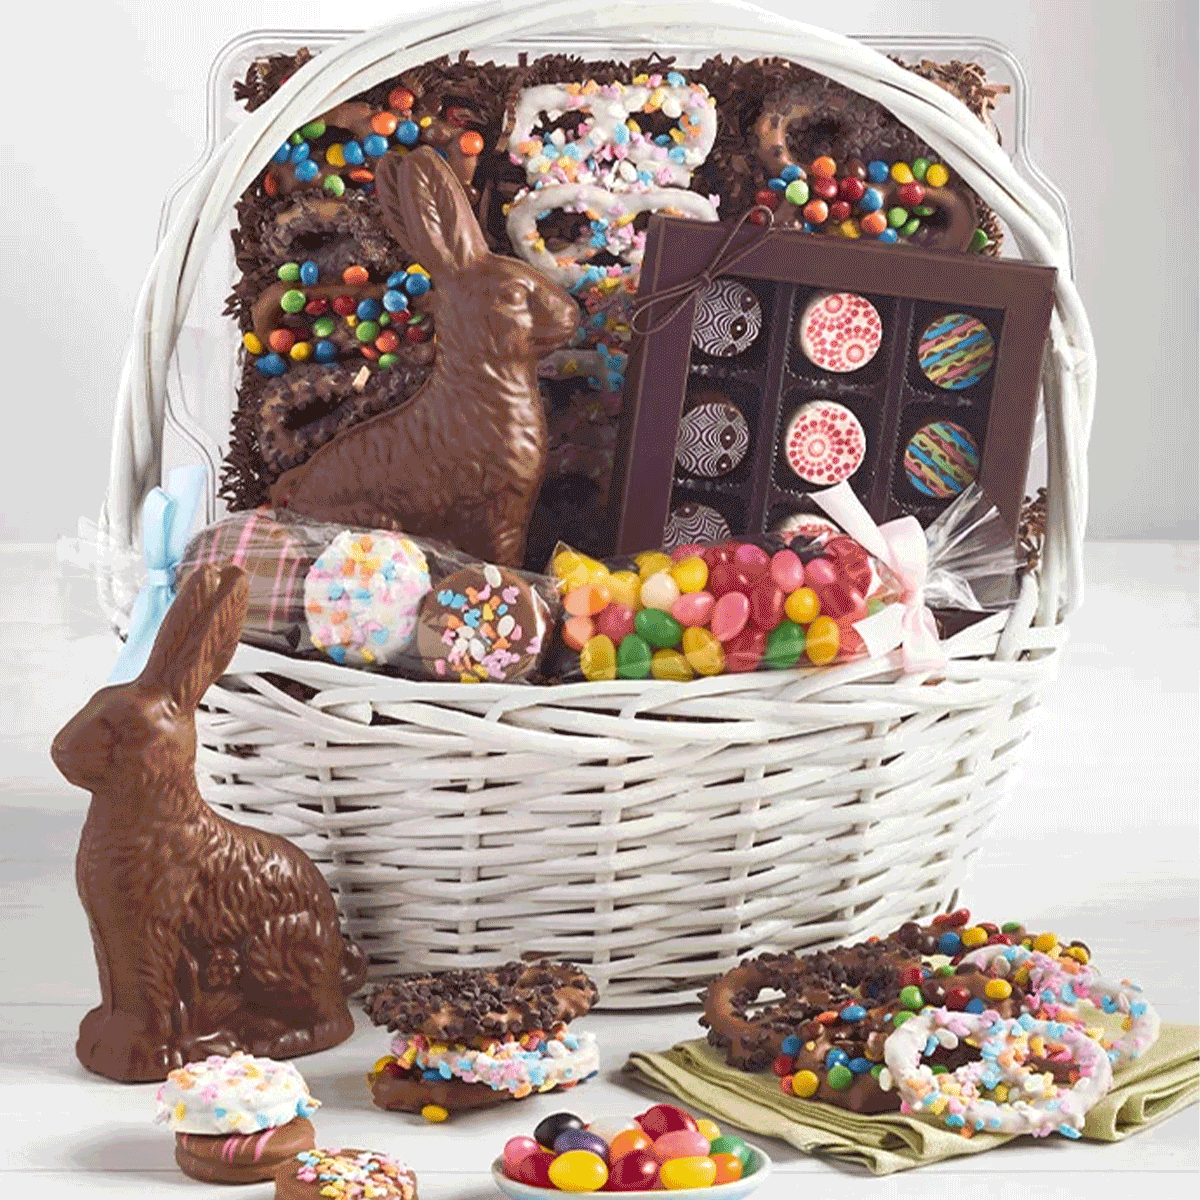 20 Best Premade Easter Baskets for Everyone in the Family